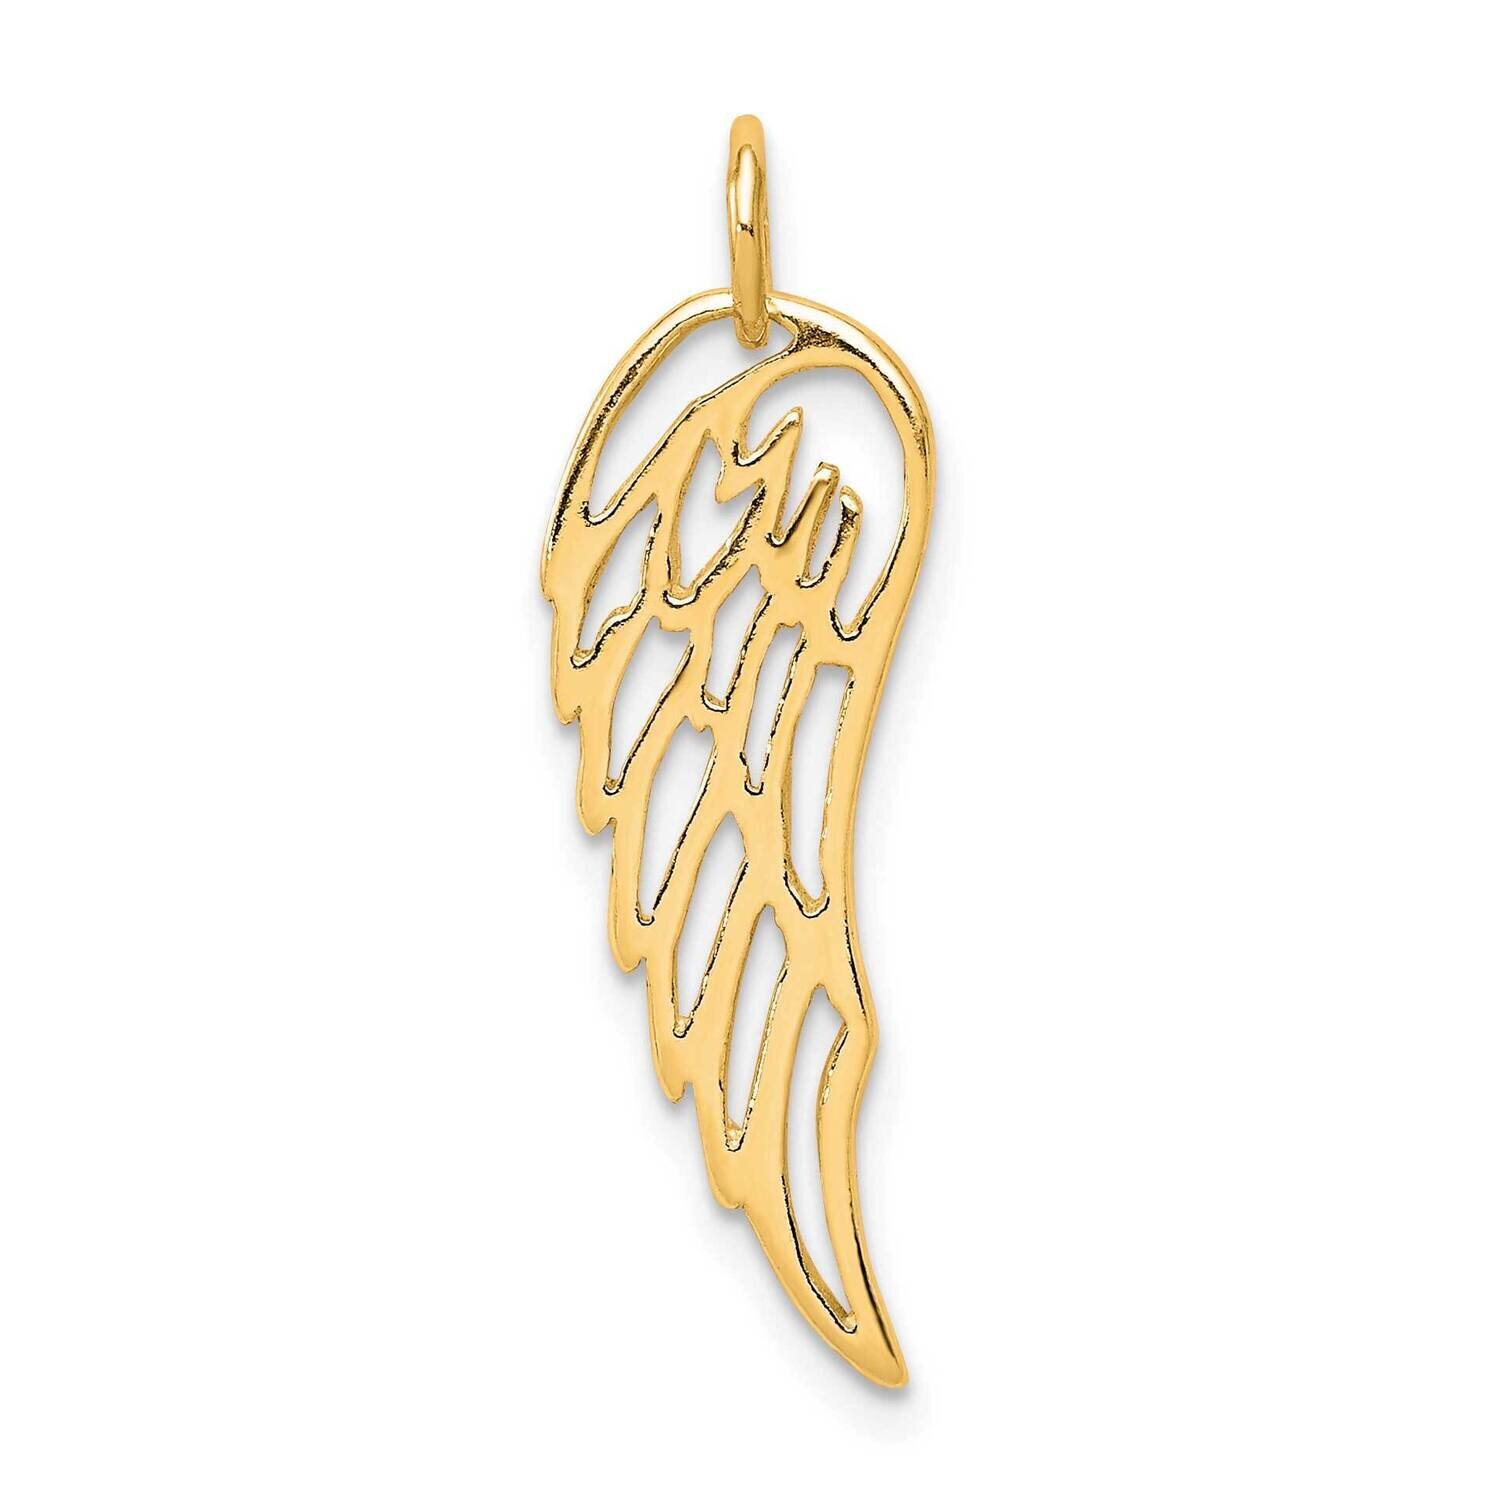 Polished Angel Wing Charm Sterling Silver Gold-Tone QC8419GP